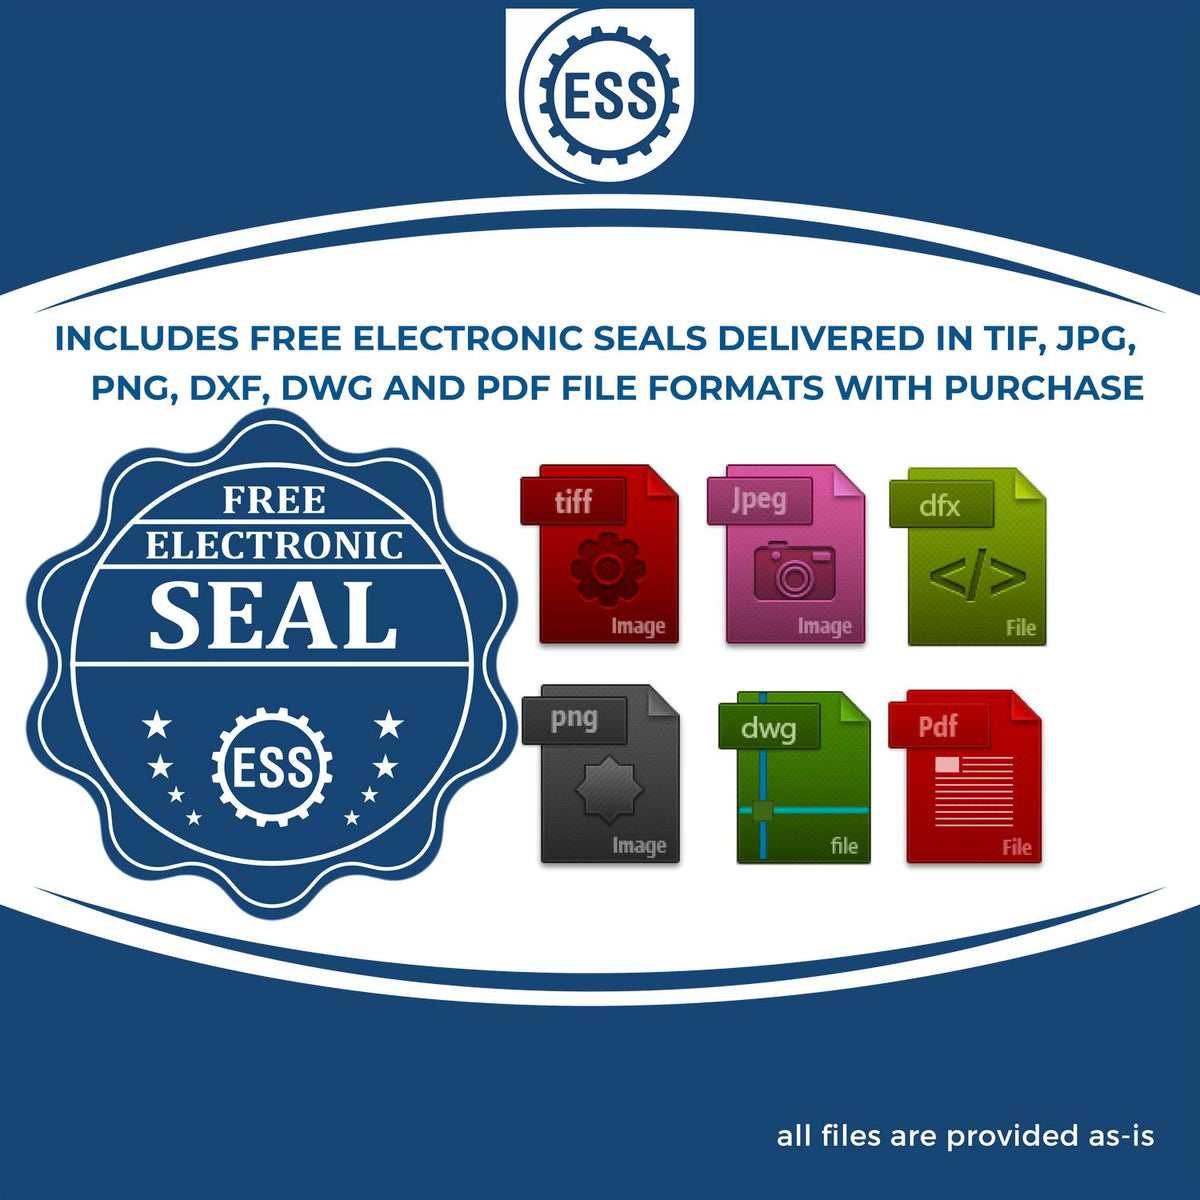 An infographic for the free electronic seal for the Soft Virginia Professional Geologist Seal illustrating the different file type icons such as DXF, DWG, TIF, JPG and PNG.